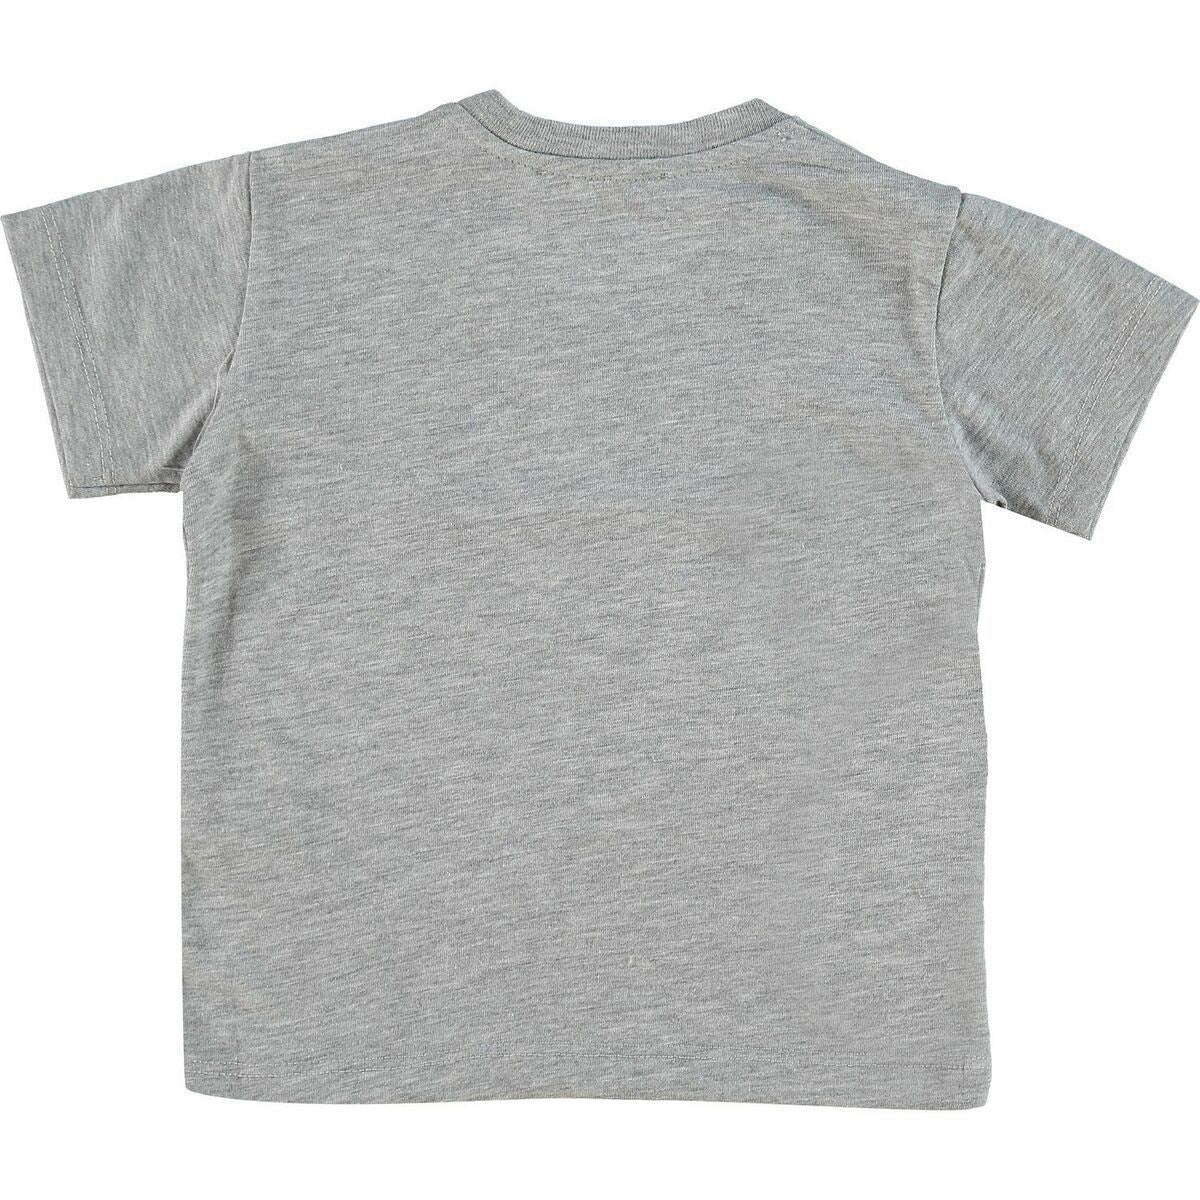 TDM Project Baby Boys' Grey Graphic T-Shirt sizes 12 m 18 m & 24 months